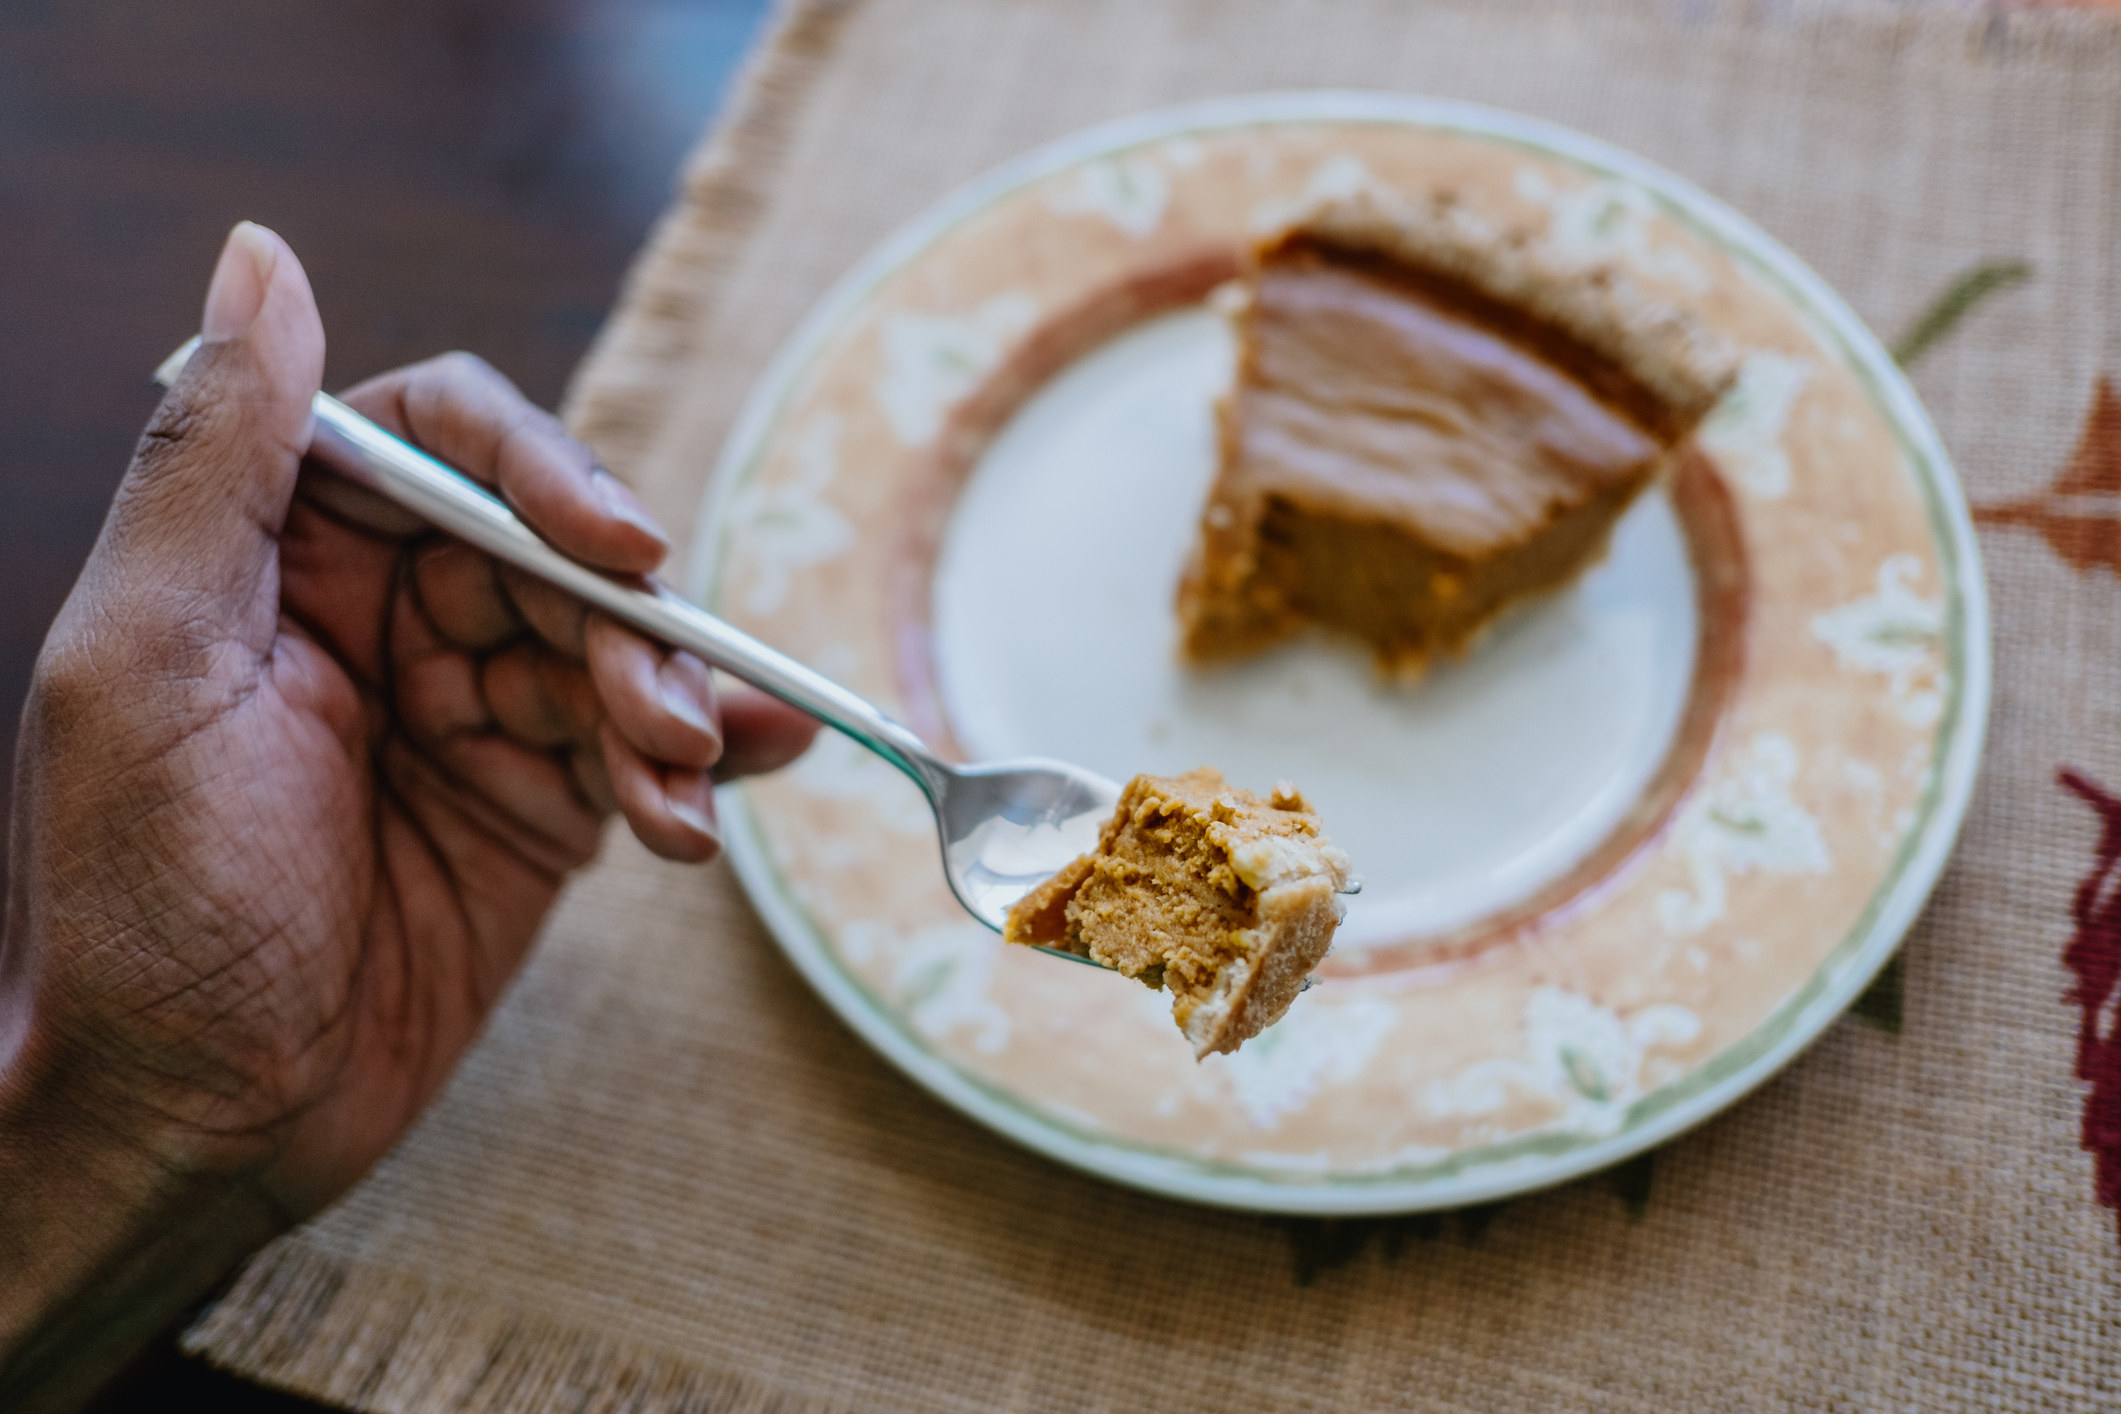 Eating a piece of pumpkin pie with a fork